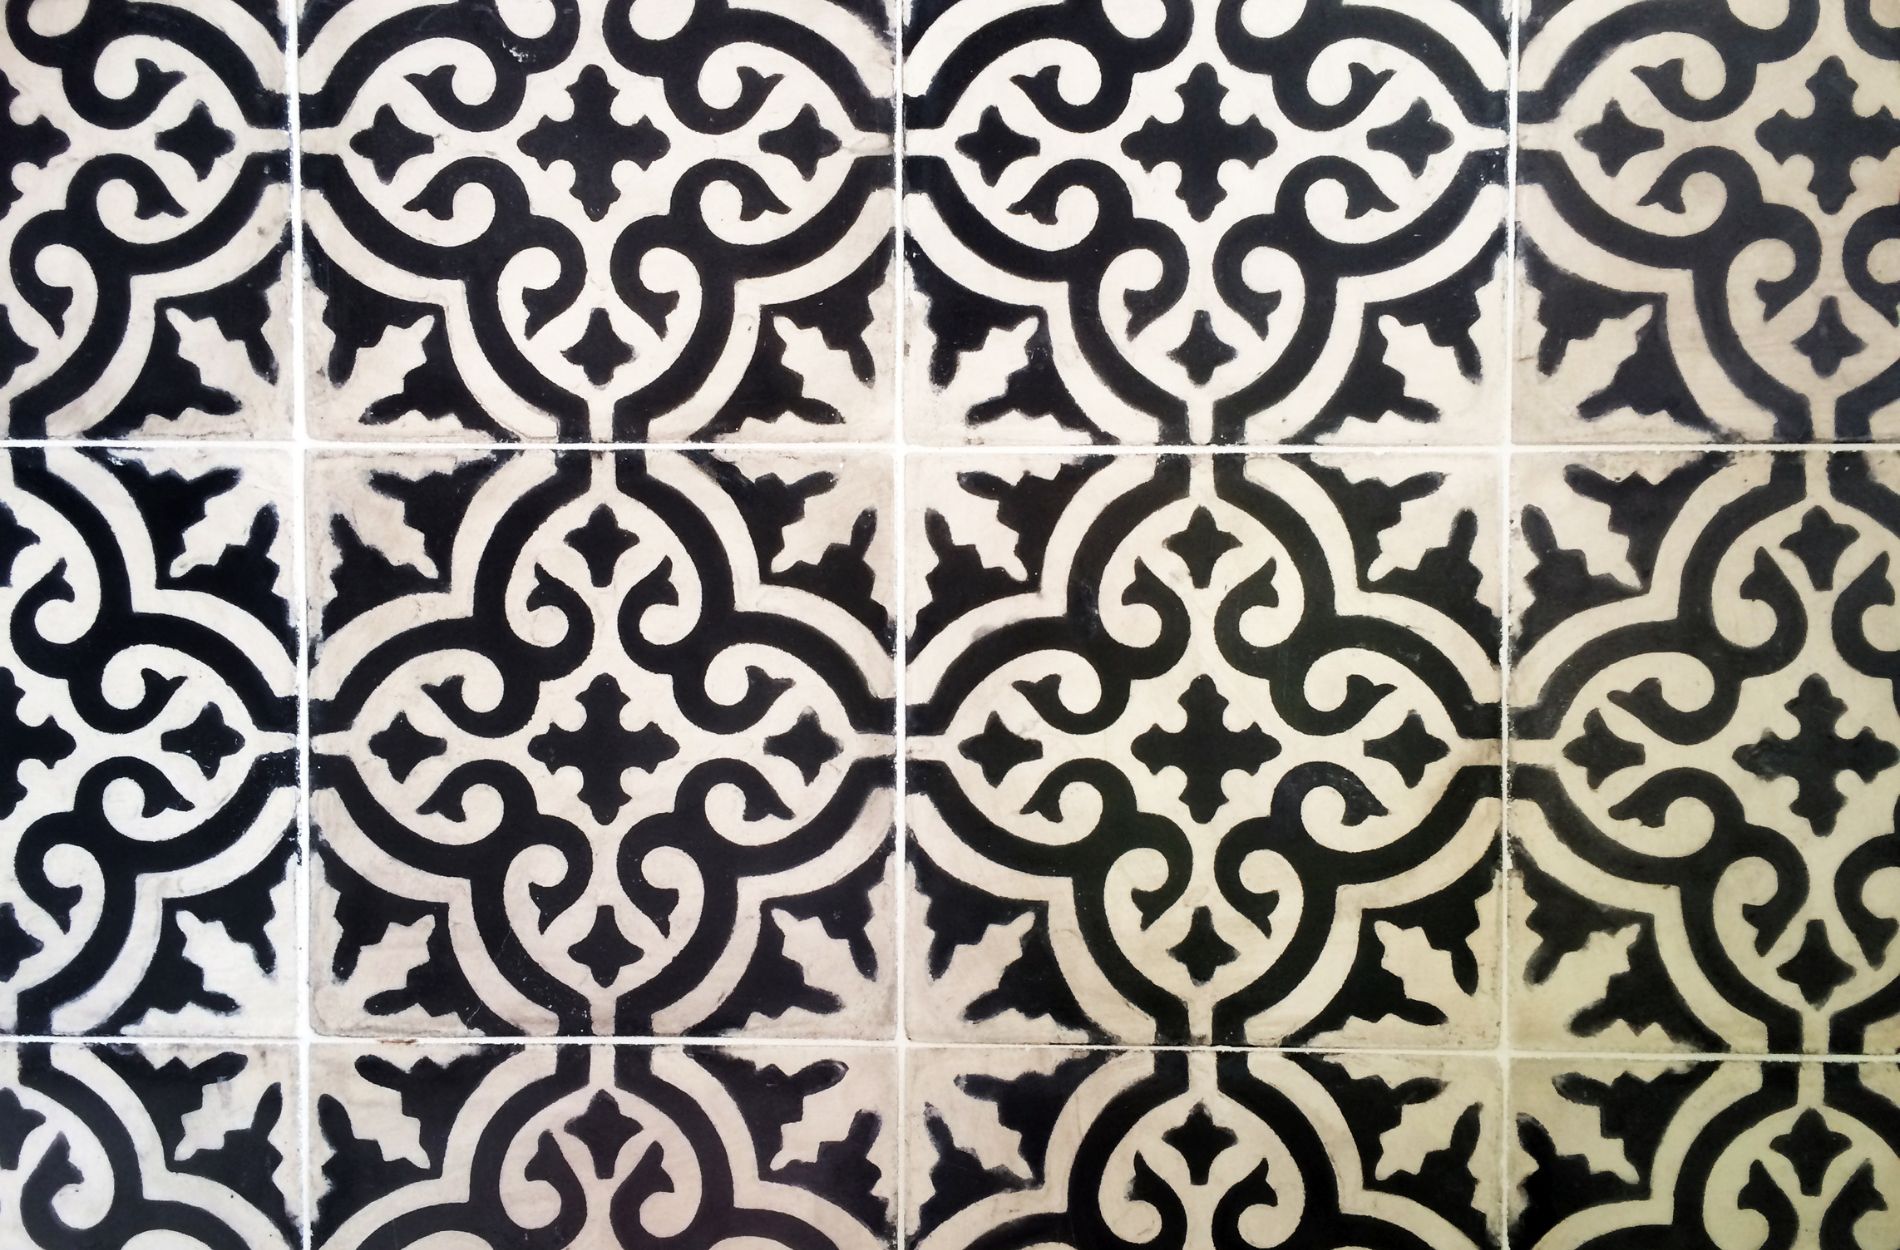 Discovering the Lure of Encaustic Cement Tiles